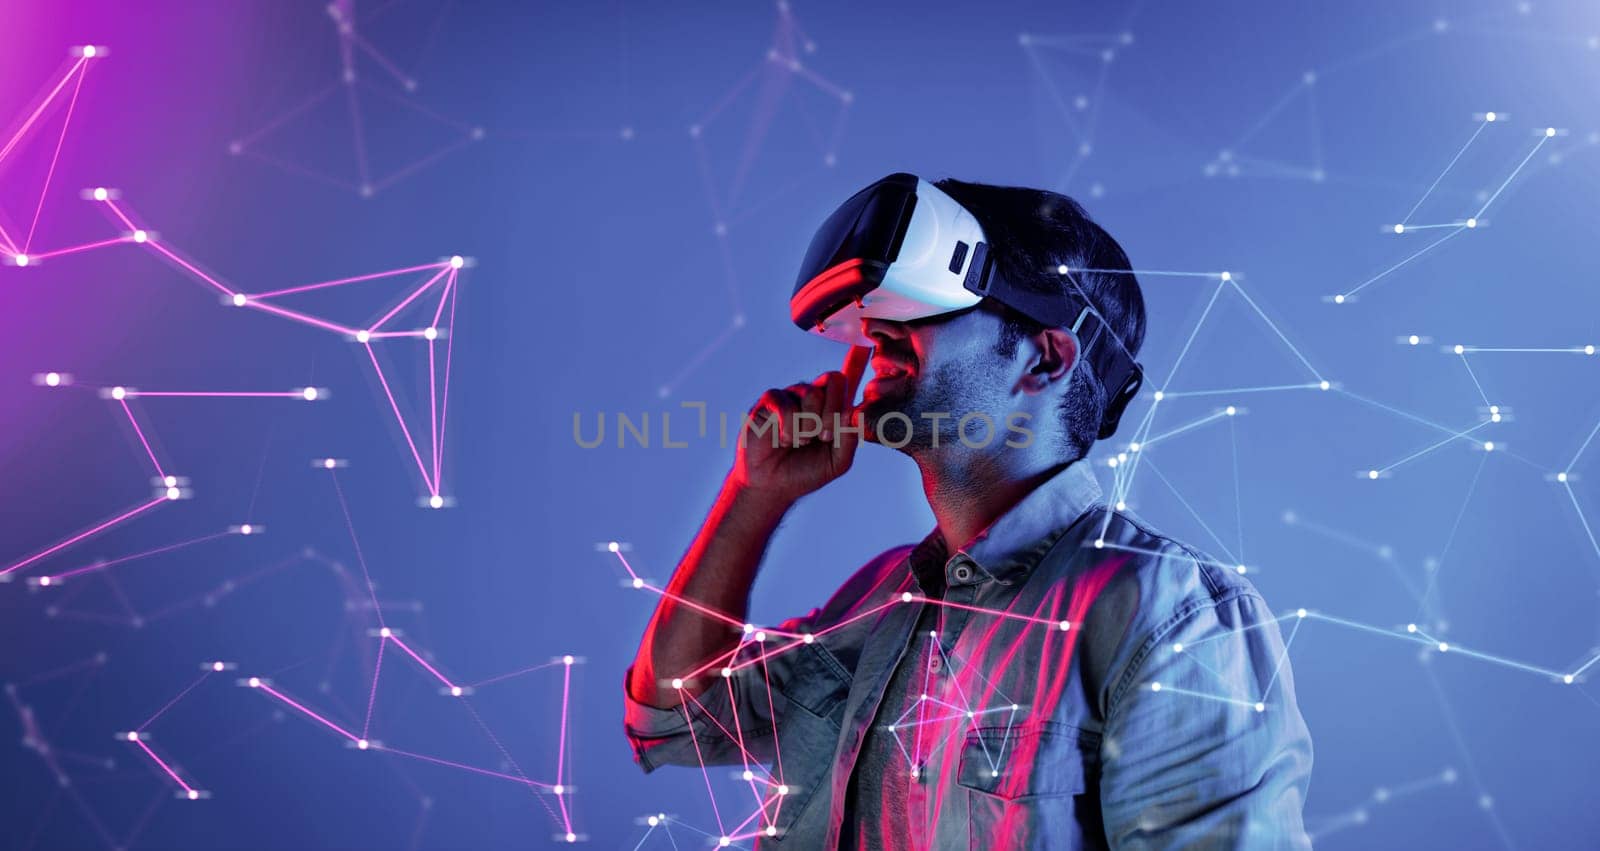 Smart caucasian man wearing VR glasses while standing at neon light. Skilled person using visual reality goggle to connect metaverse or visual world program by using technology innovation. Deviation.